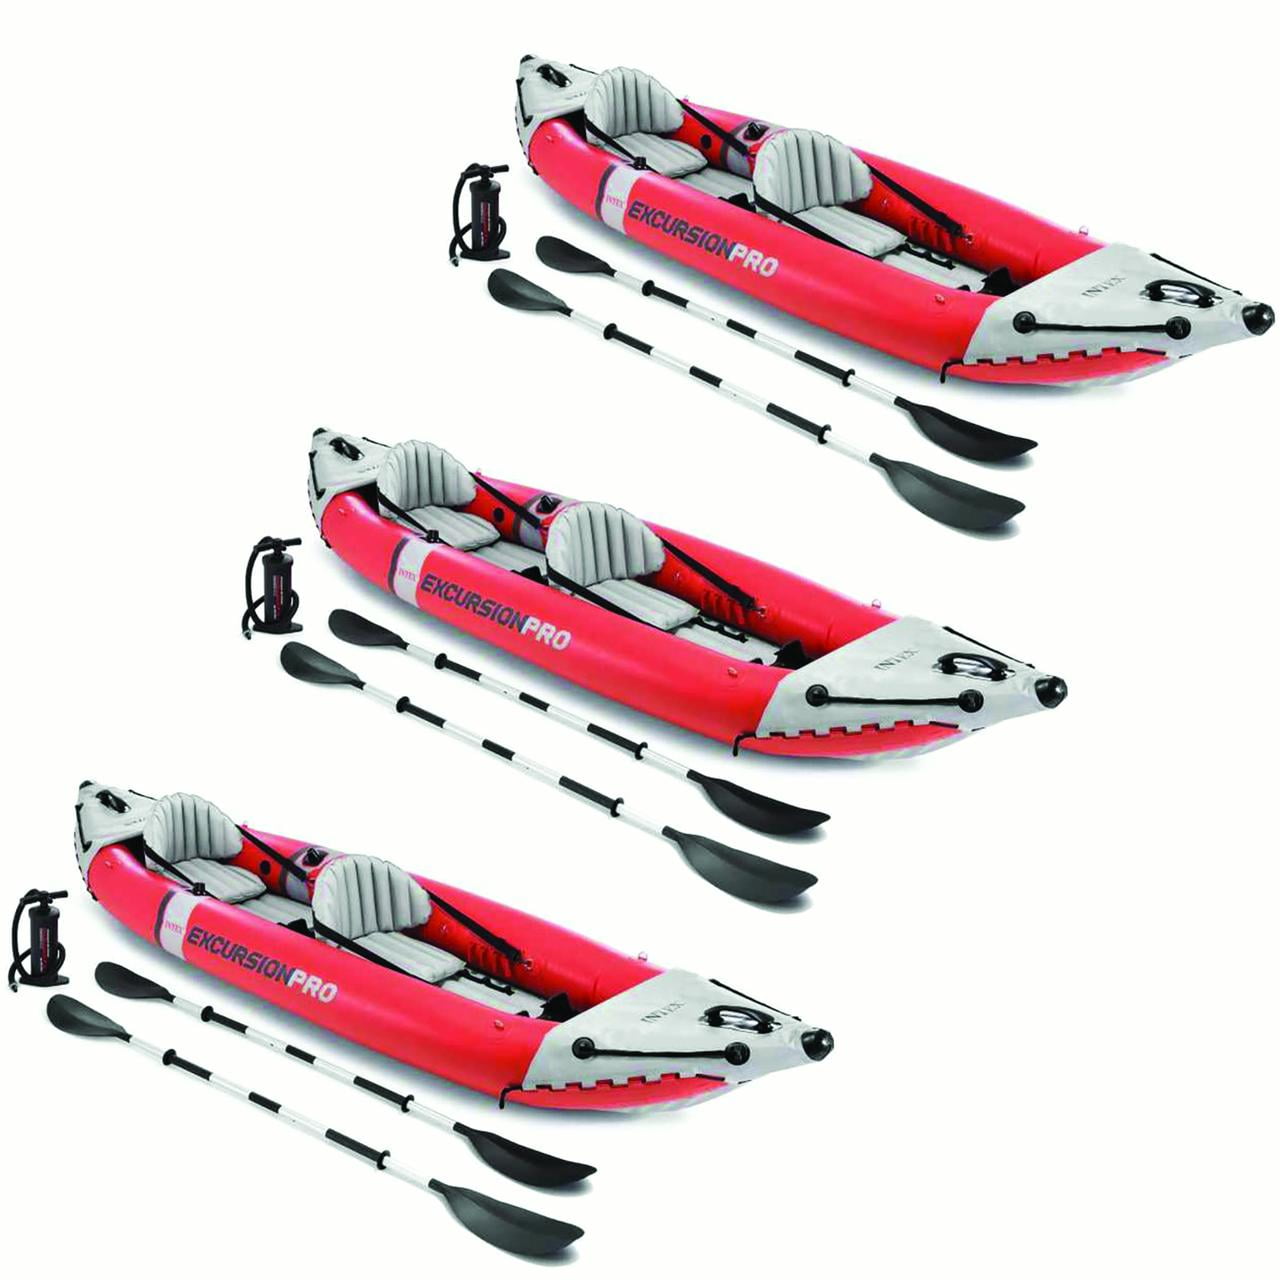 Intex Inflatable Kayak Excursion Pro 384x94x46cm Rafting Rowing Boat Canoe 